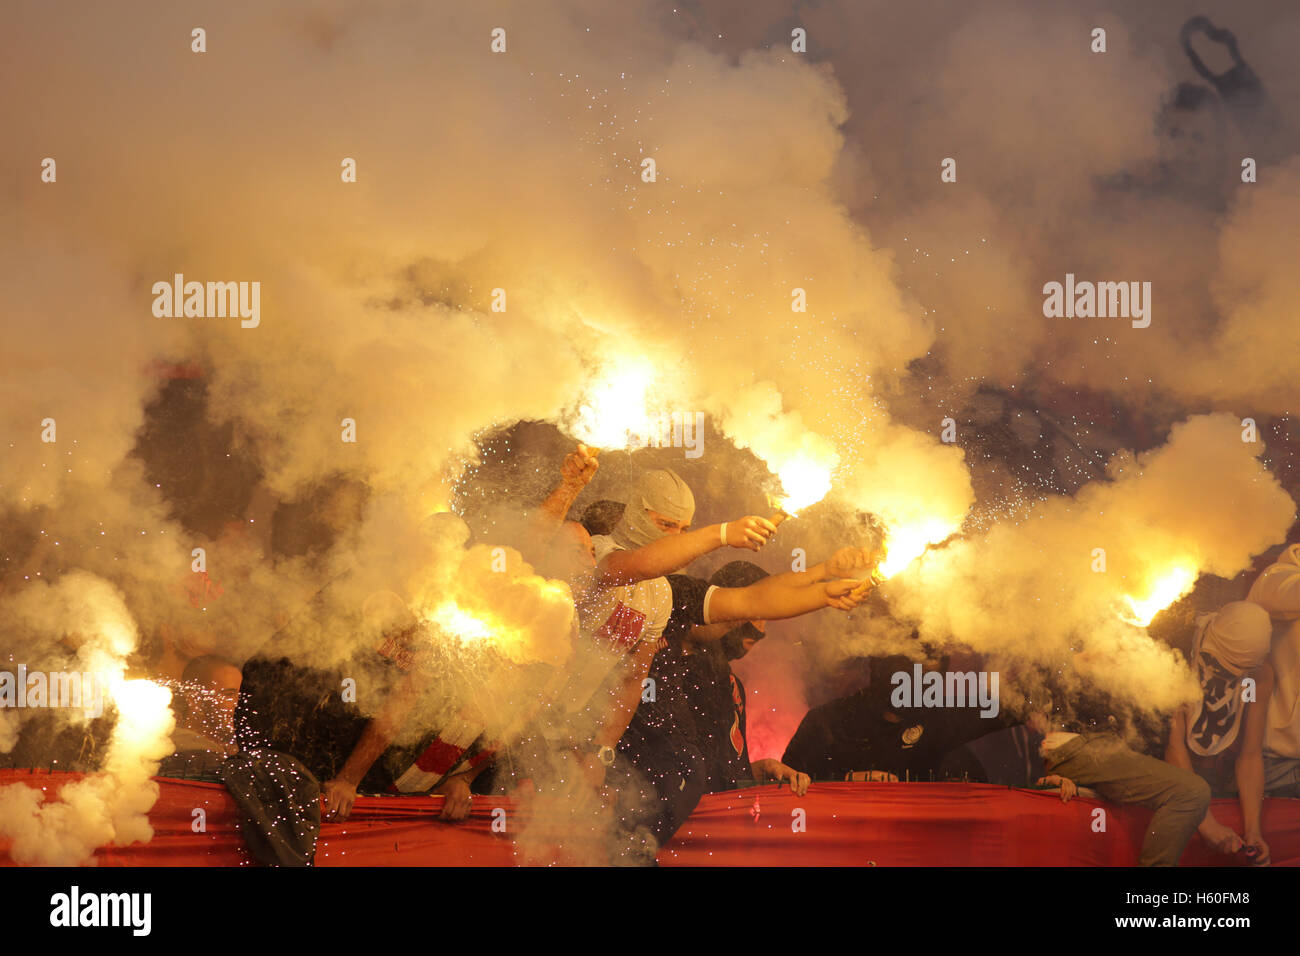 Sofia, Bulgaria - October 15, 2016: CSKA's football fans are holding torches in fire during a match between Bulgaria's CSKA and  Stock Photo